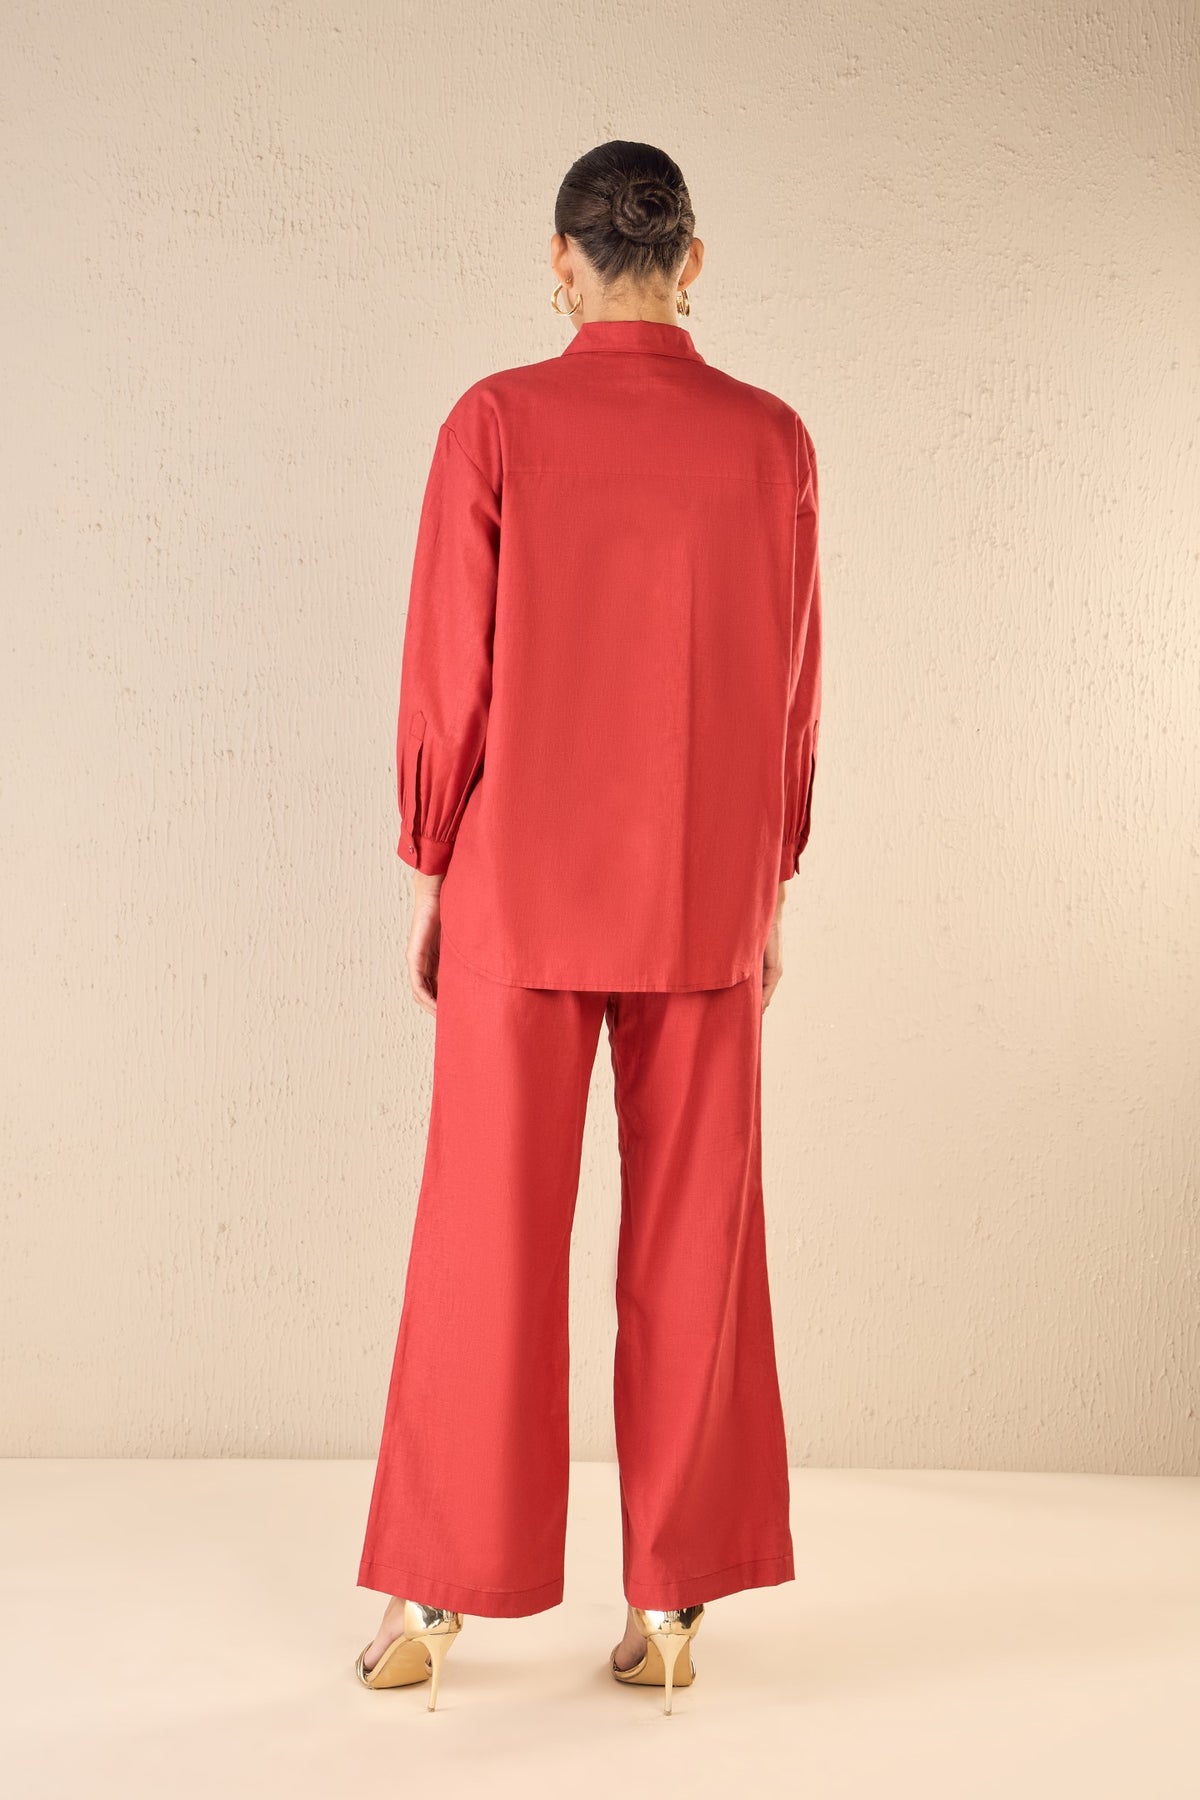 ROSE DREAM: RED OVERSIZE COTTON SHIRT CO-ORD SET